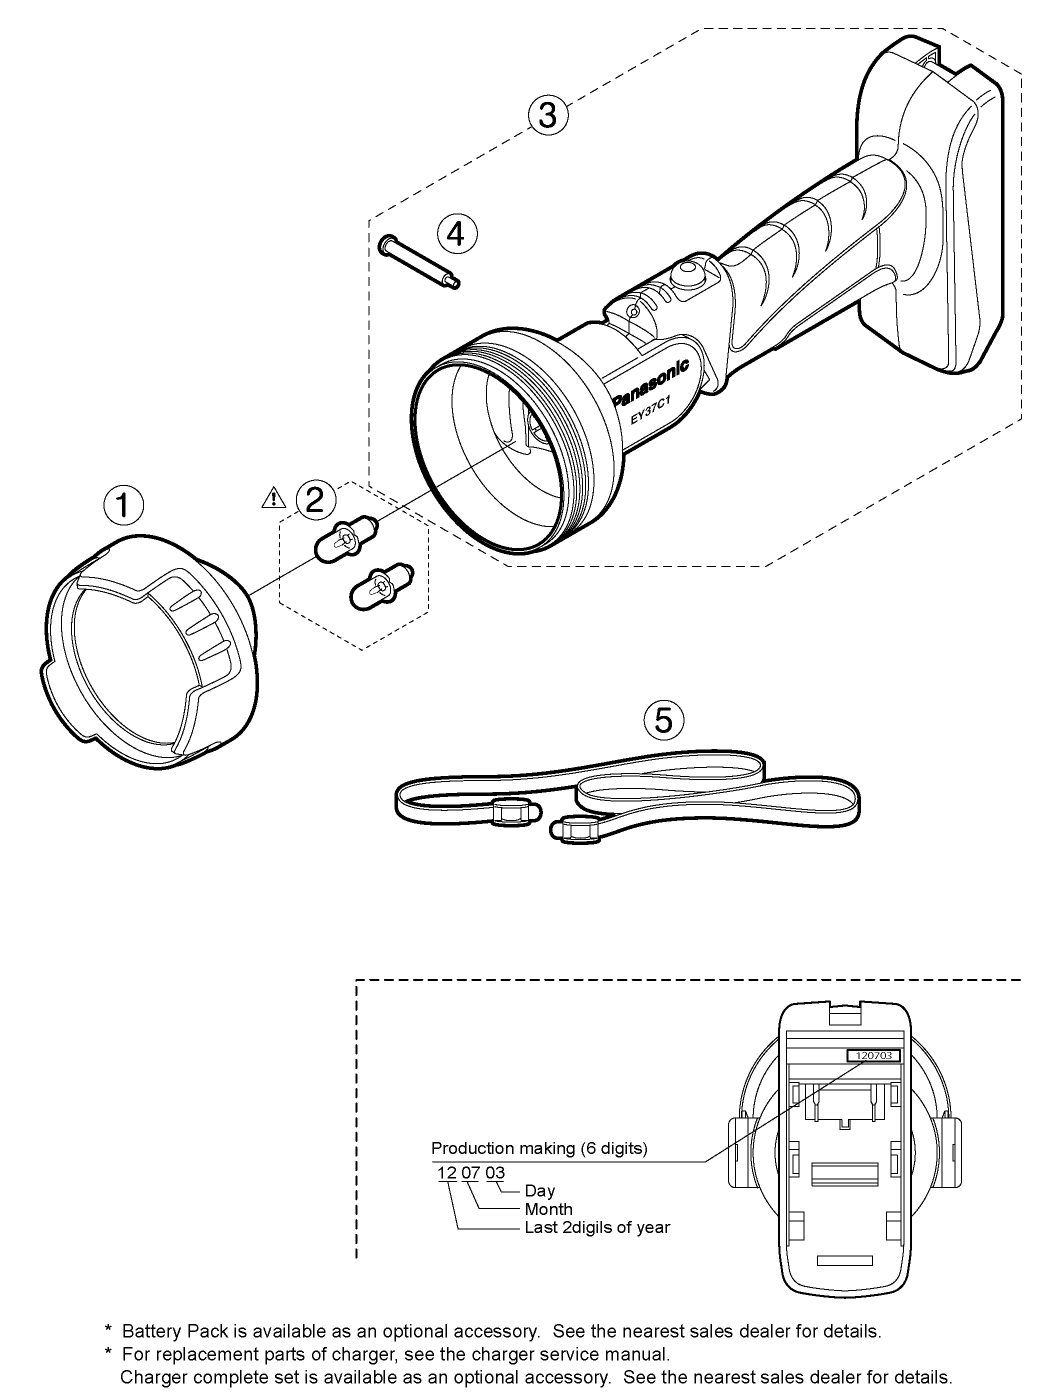 EY37C1: Exploded View